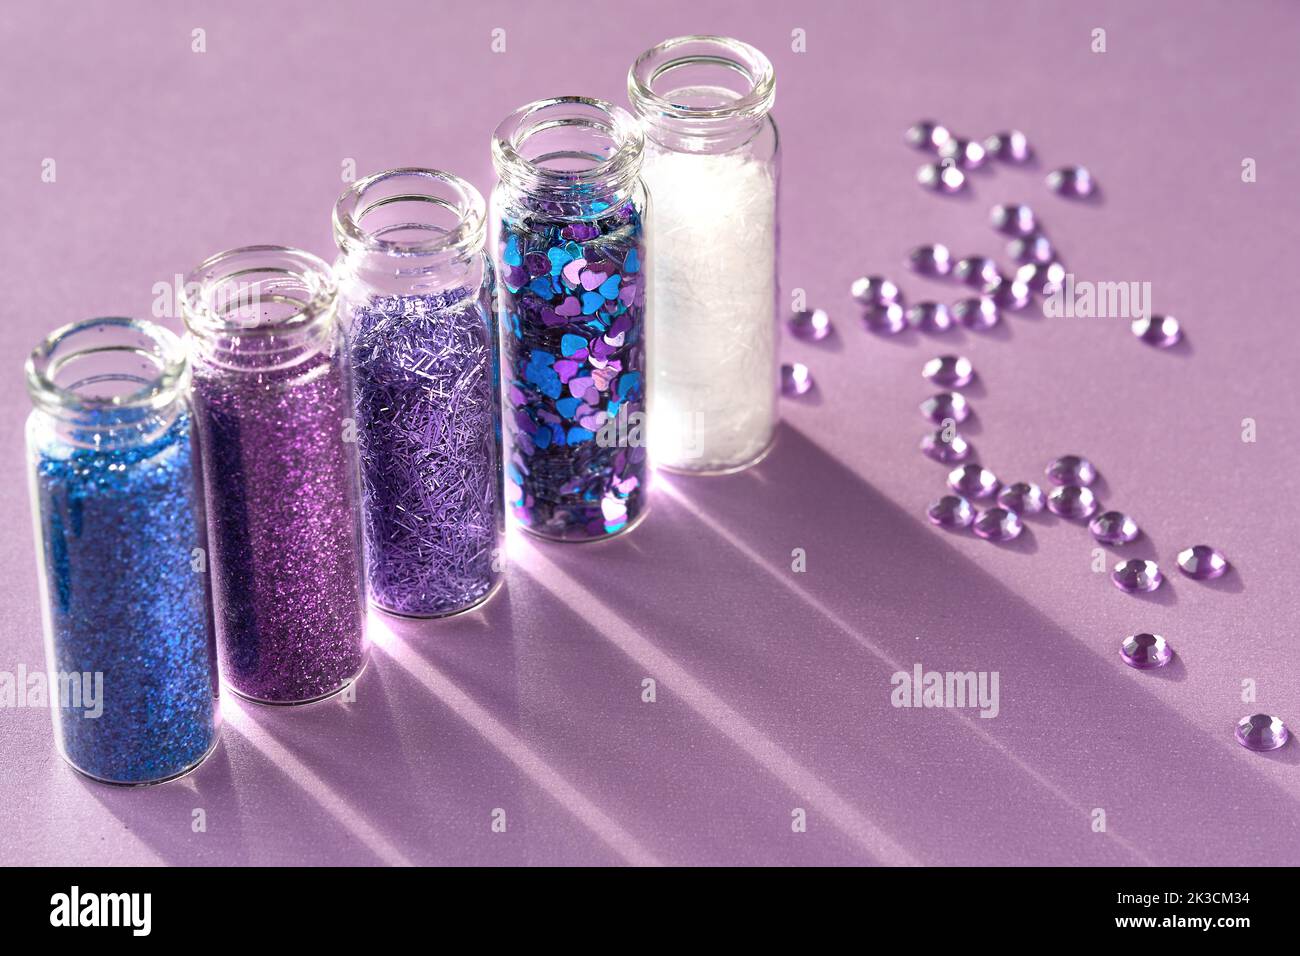 All kinds of glitter products on pink sparkling background. Close-up on vials, bottles with various glitter makeup in neon pink, blue and turquoise Stock Photo